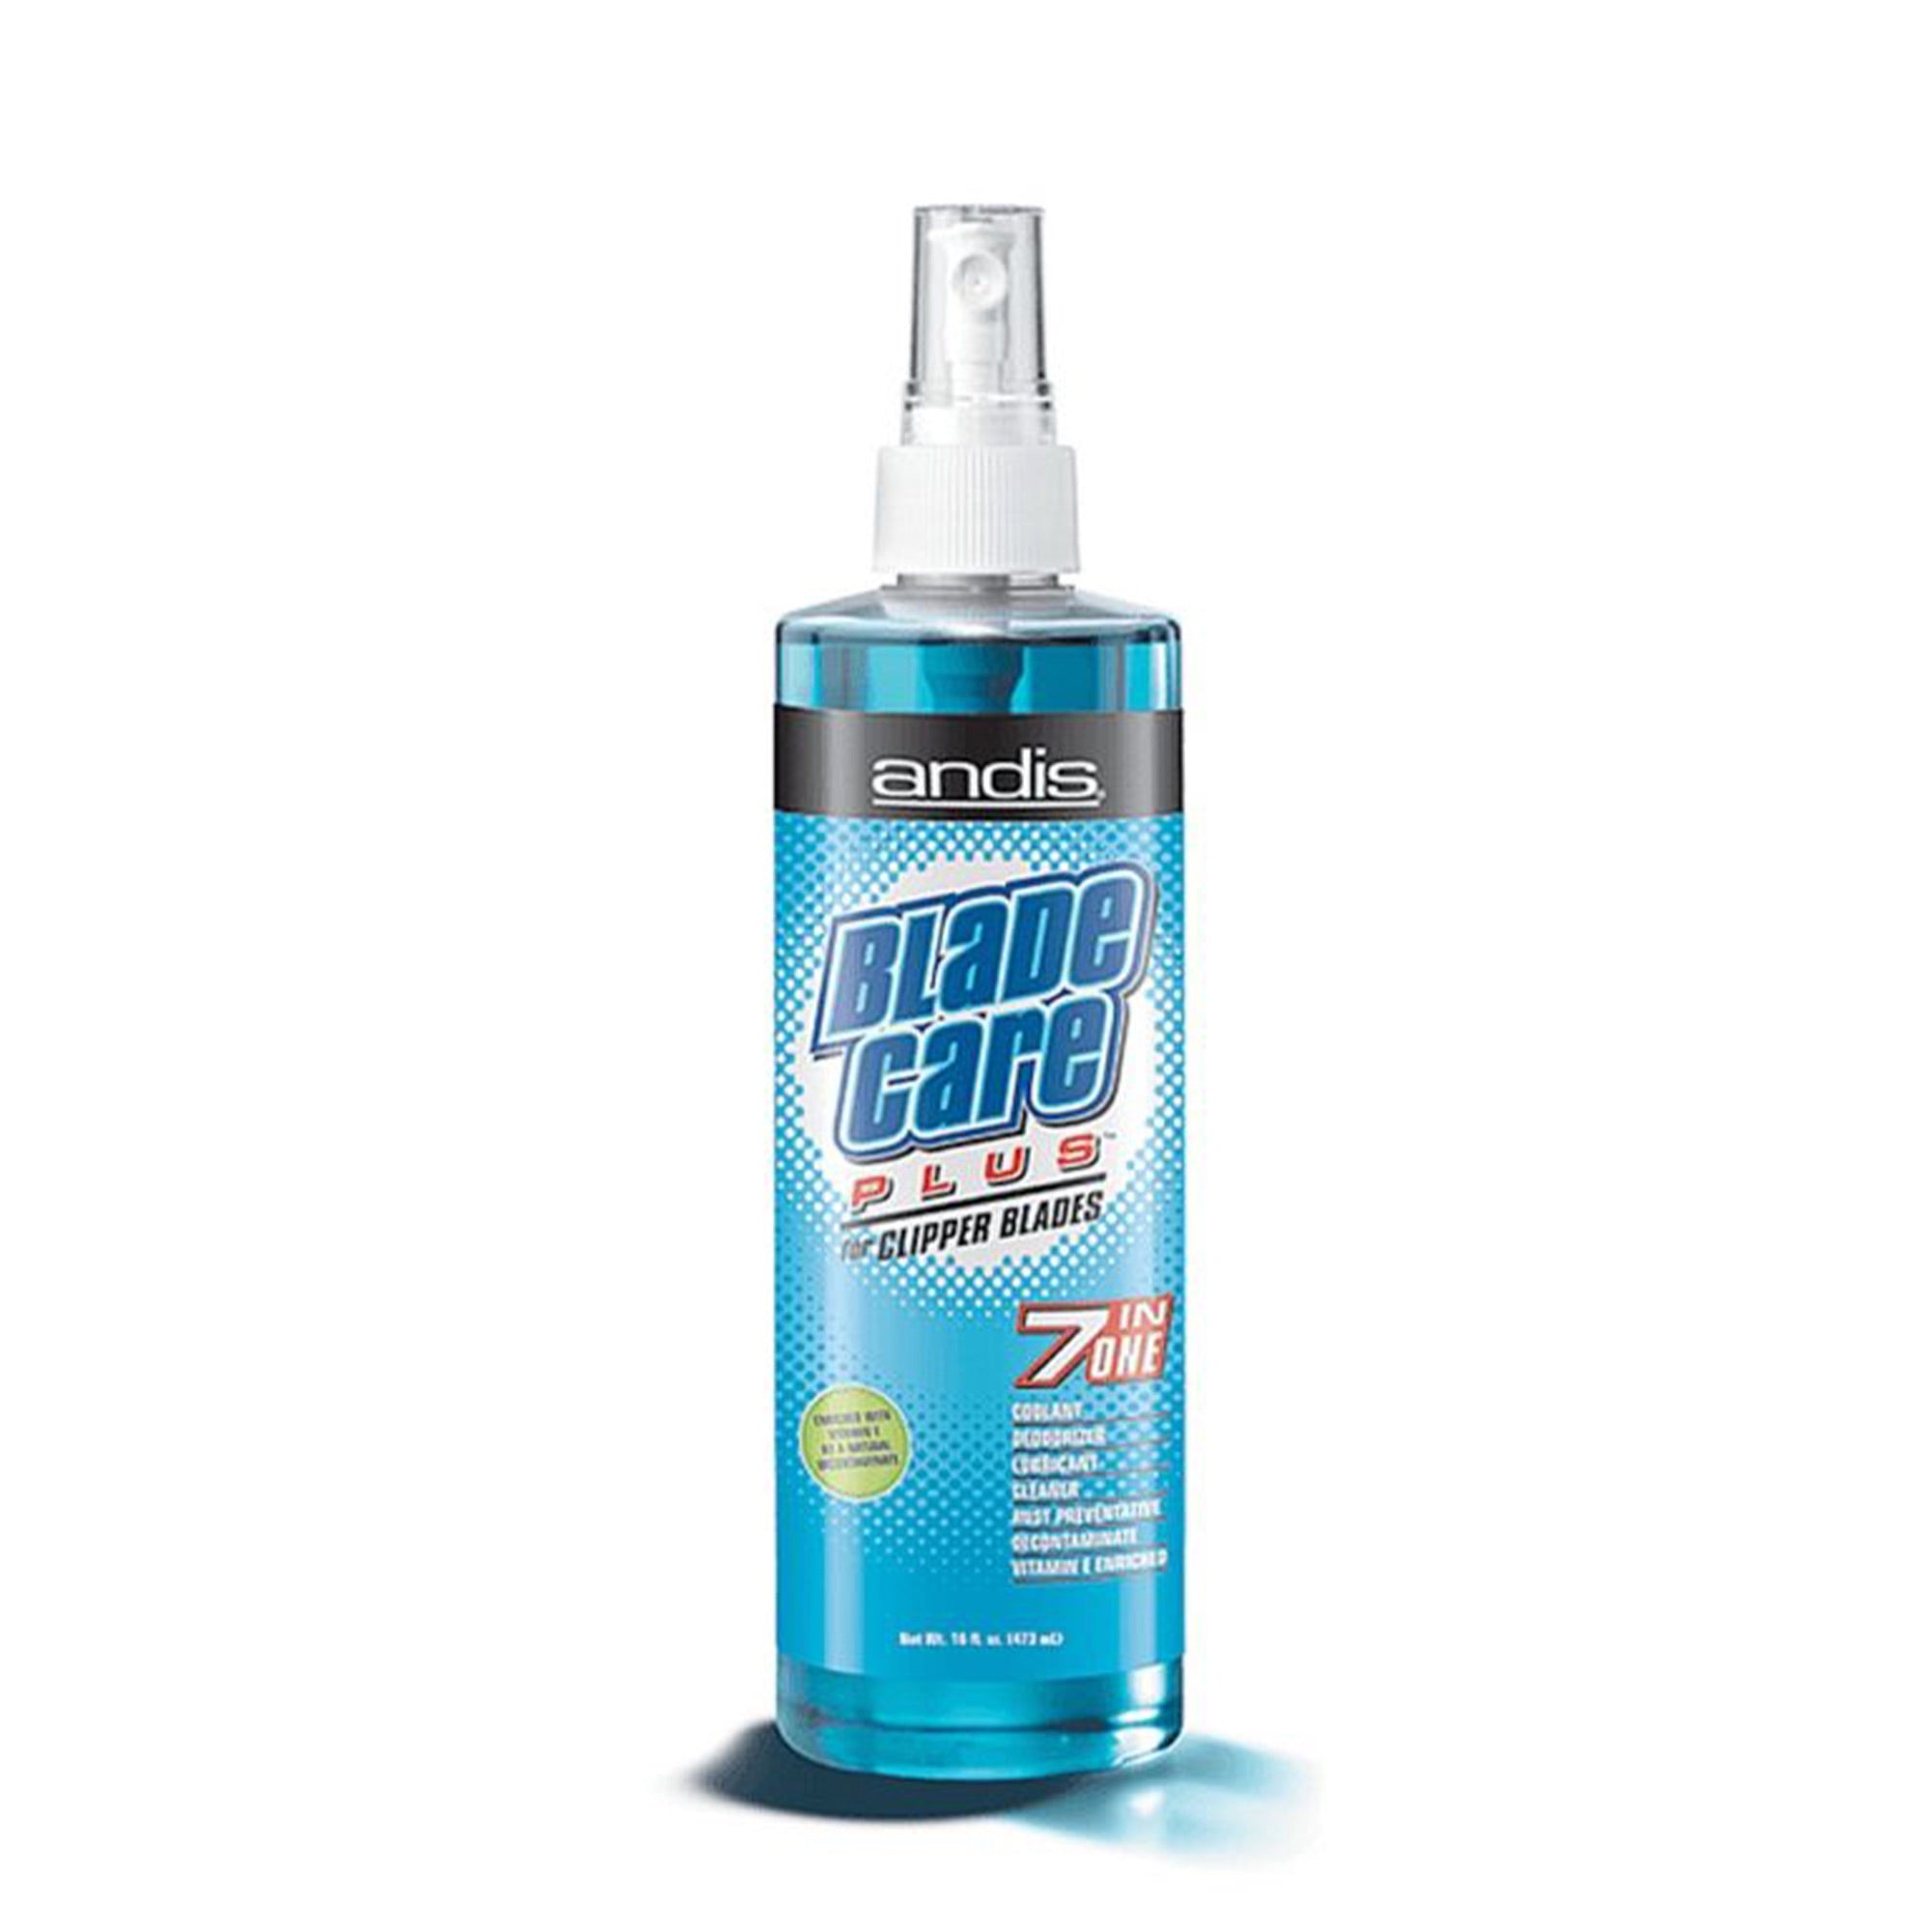 Andis - Blade Care Plus 7 in 1 Cleaner Spray 473ml - Eson Direct